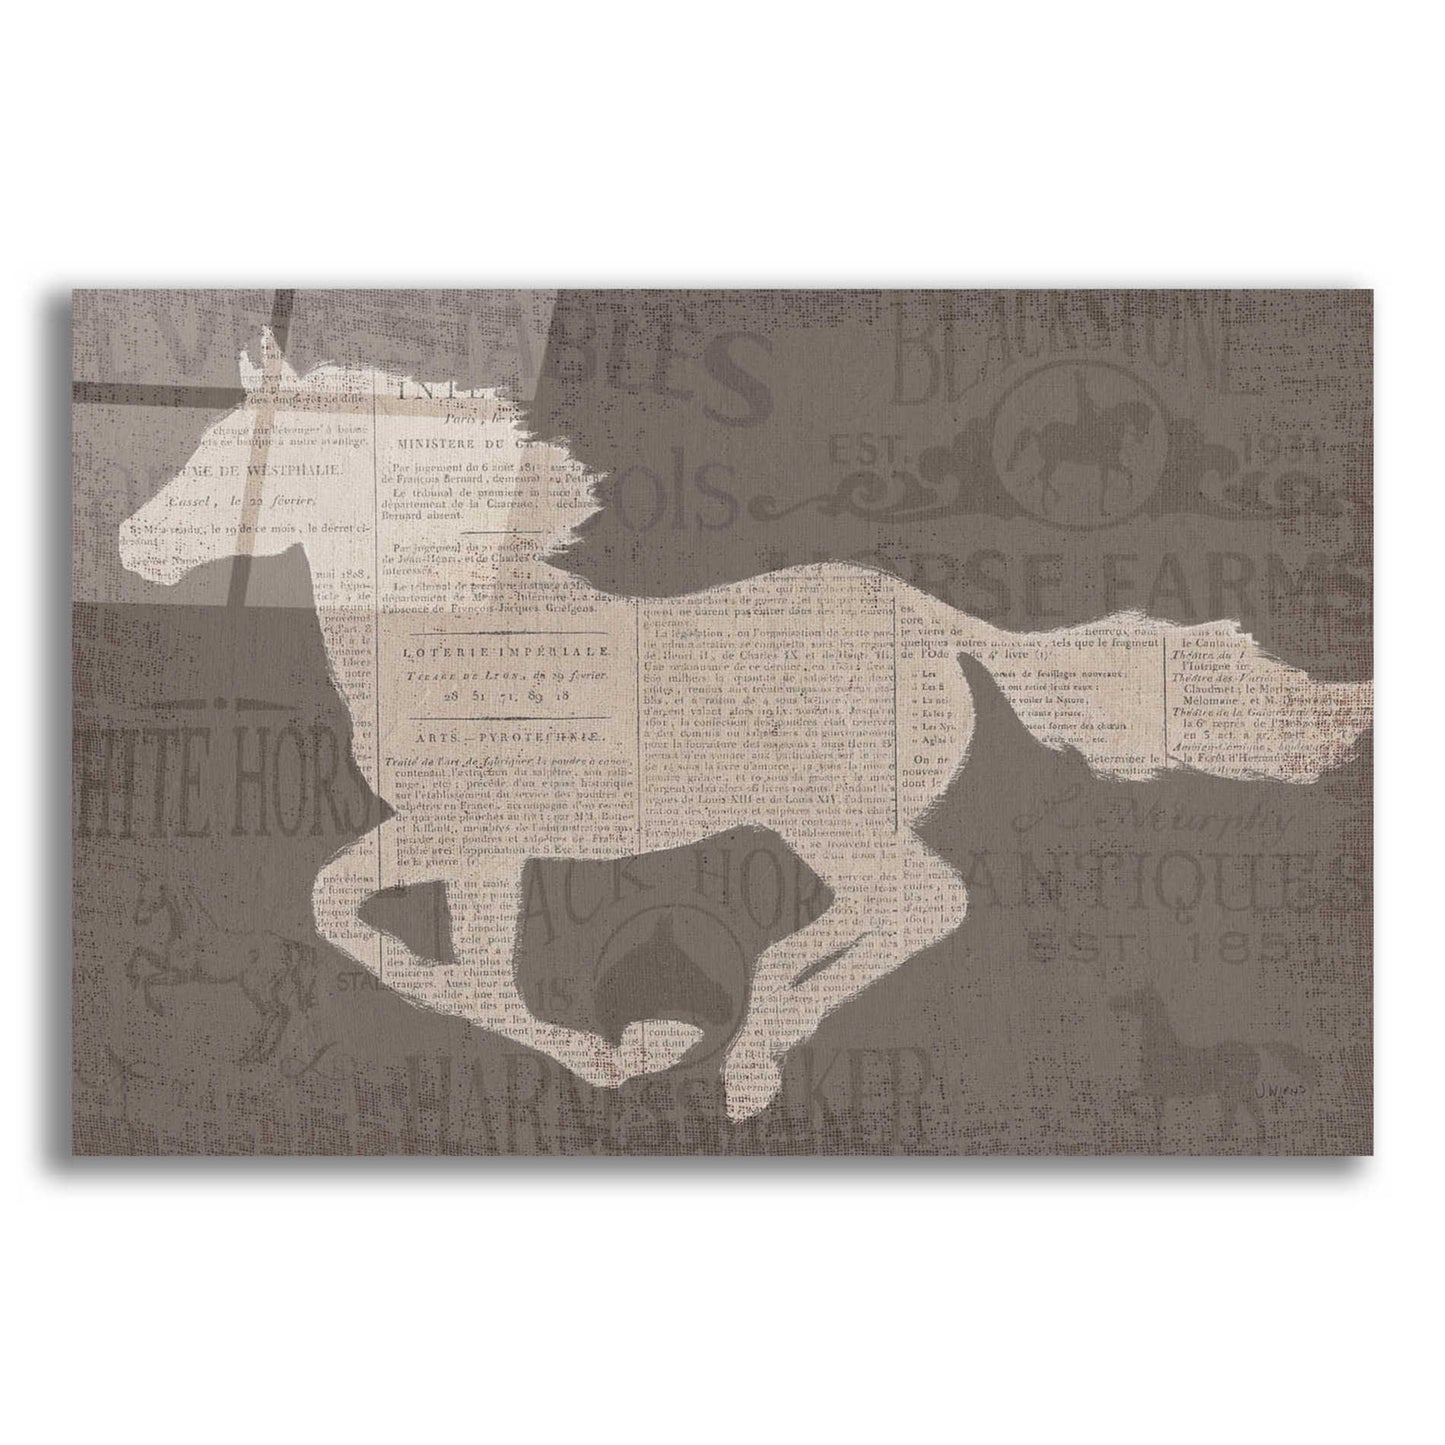 Epic Art 'Equine I' by James Wiens, Acrylic Glass Wall Art,18x12x1.1x0,26x18x1.1x0,40x26x1.74x0,60x40x1.74x0